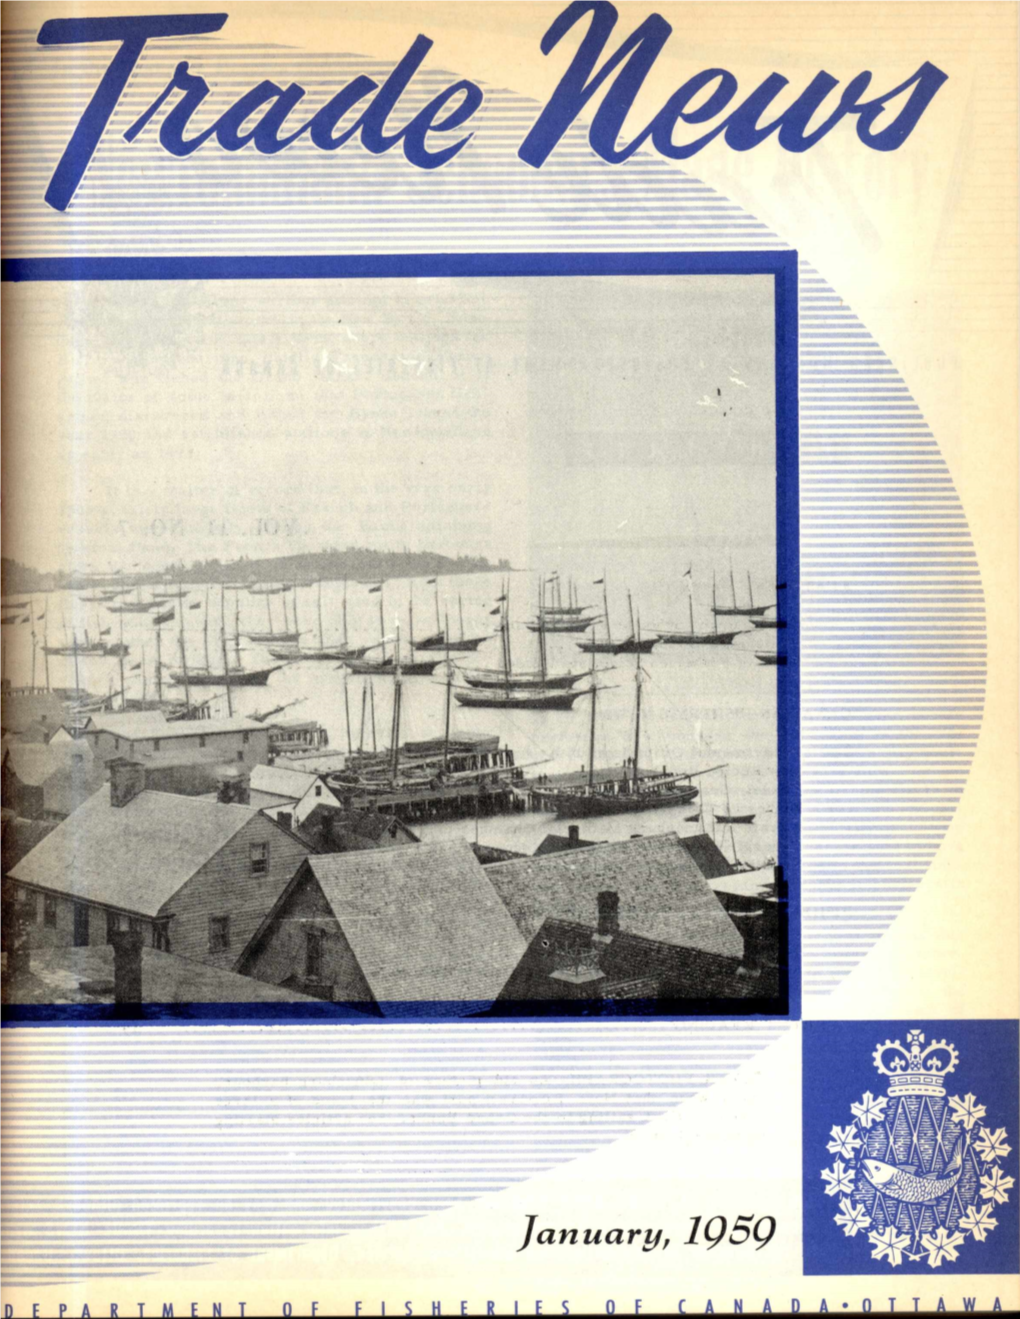 January, 1959 PUBLISHED MONTHLY by the DEPARTMENT of FISHERIES of CANADA